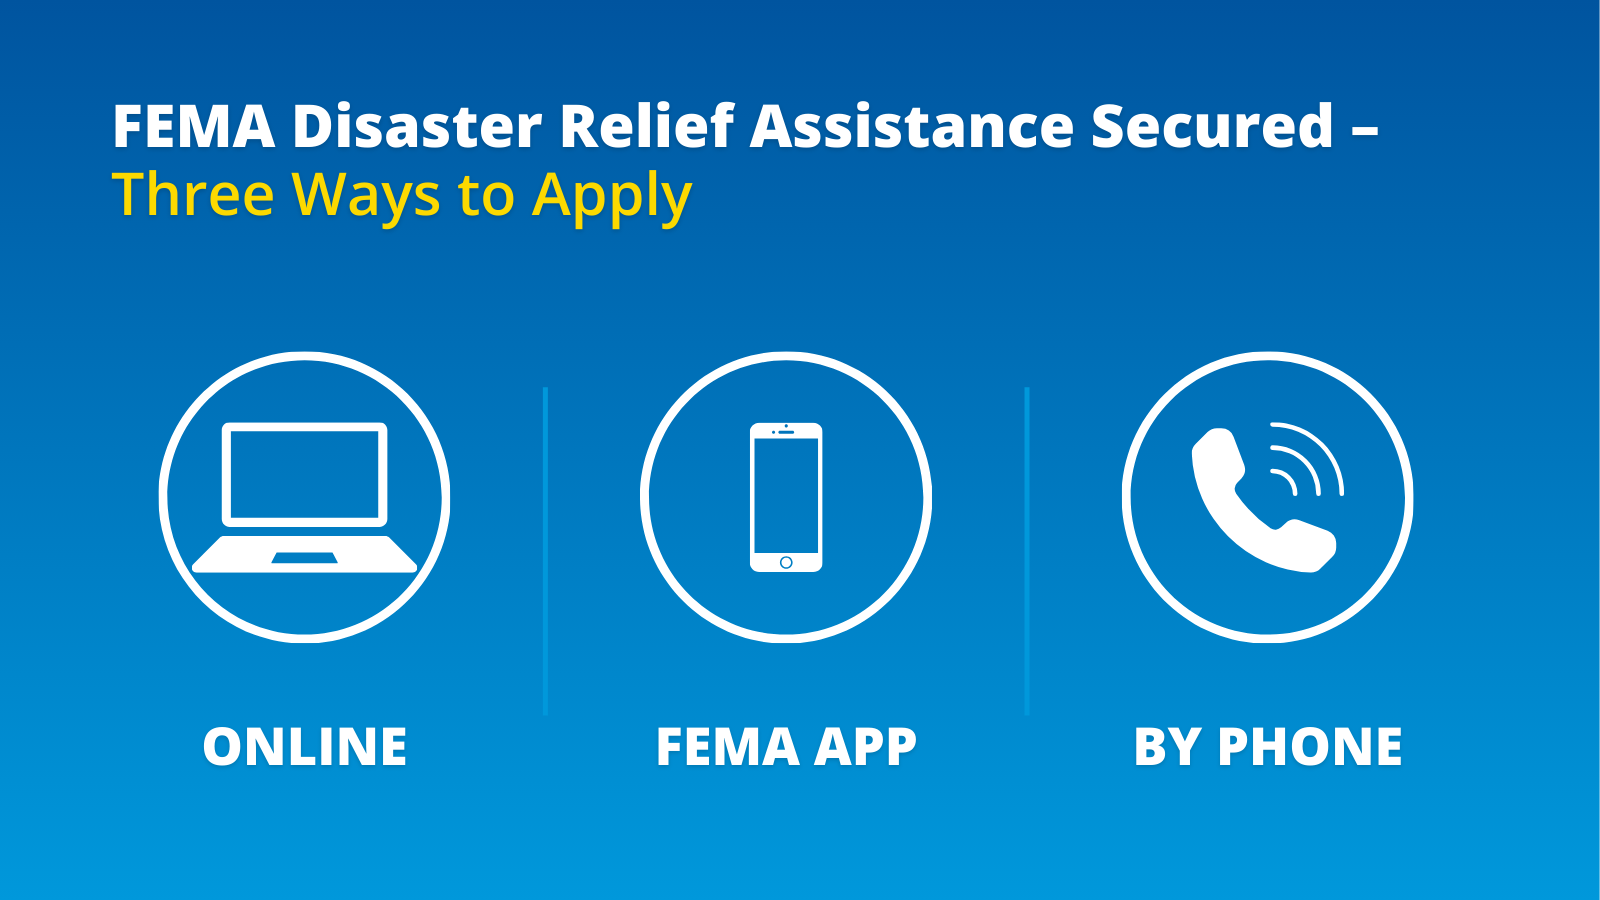 Fema application secured- three ways to apply. Images of laptop, cell phone, and home phone